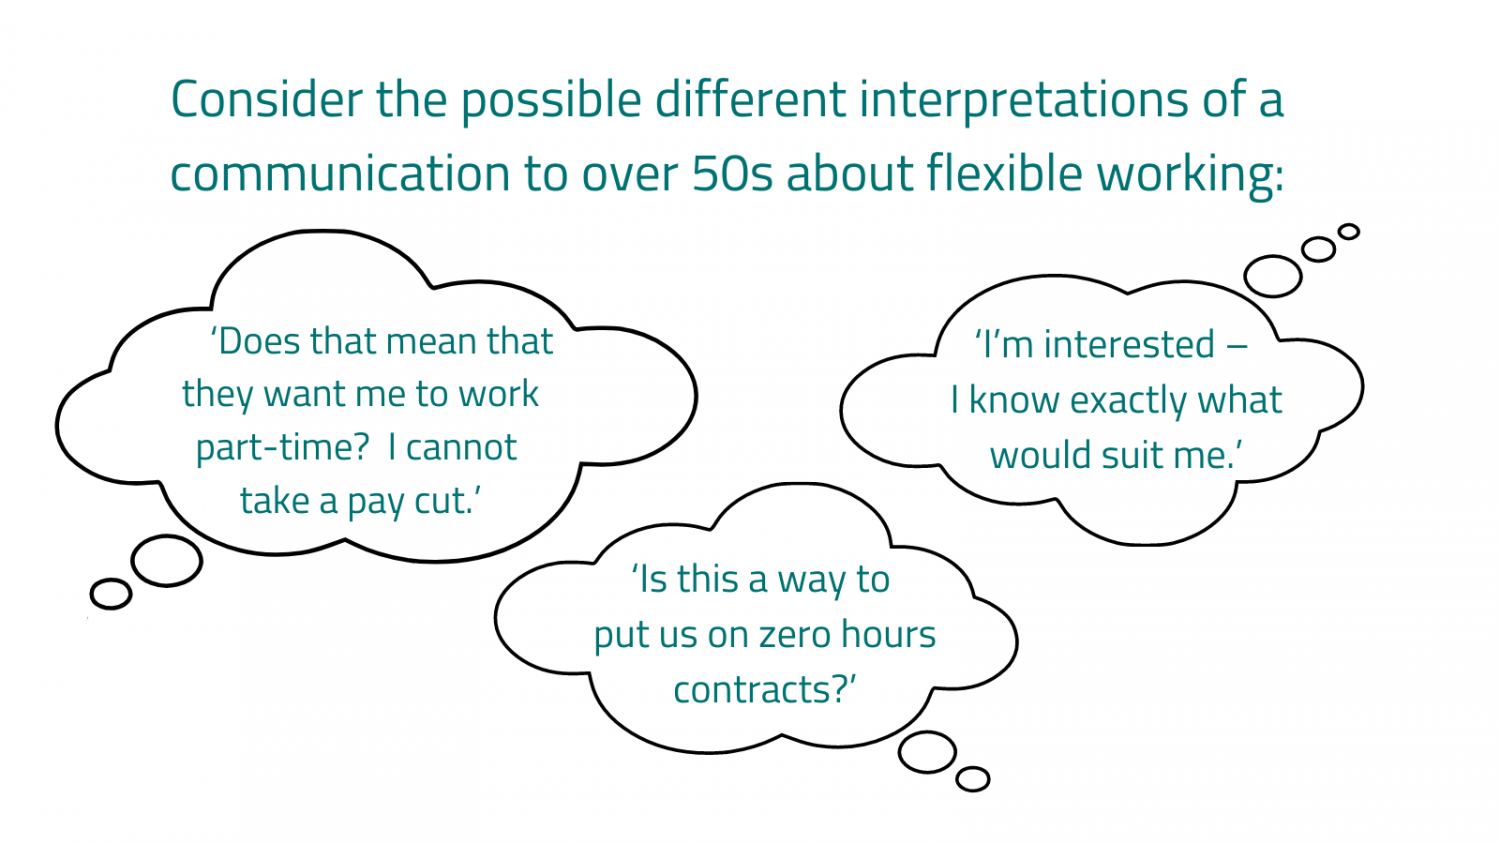 Flexible working for older workers